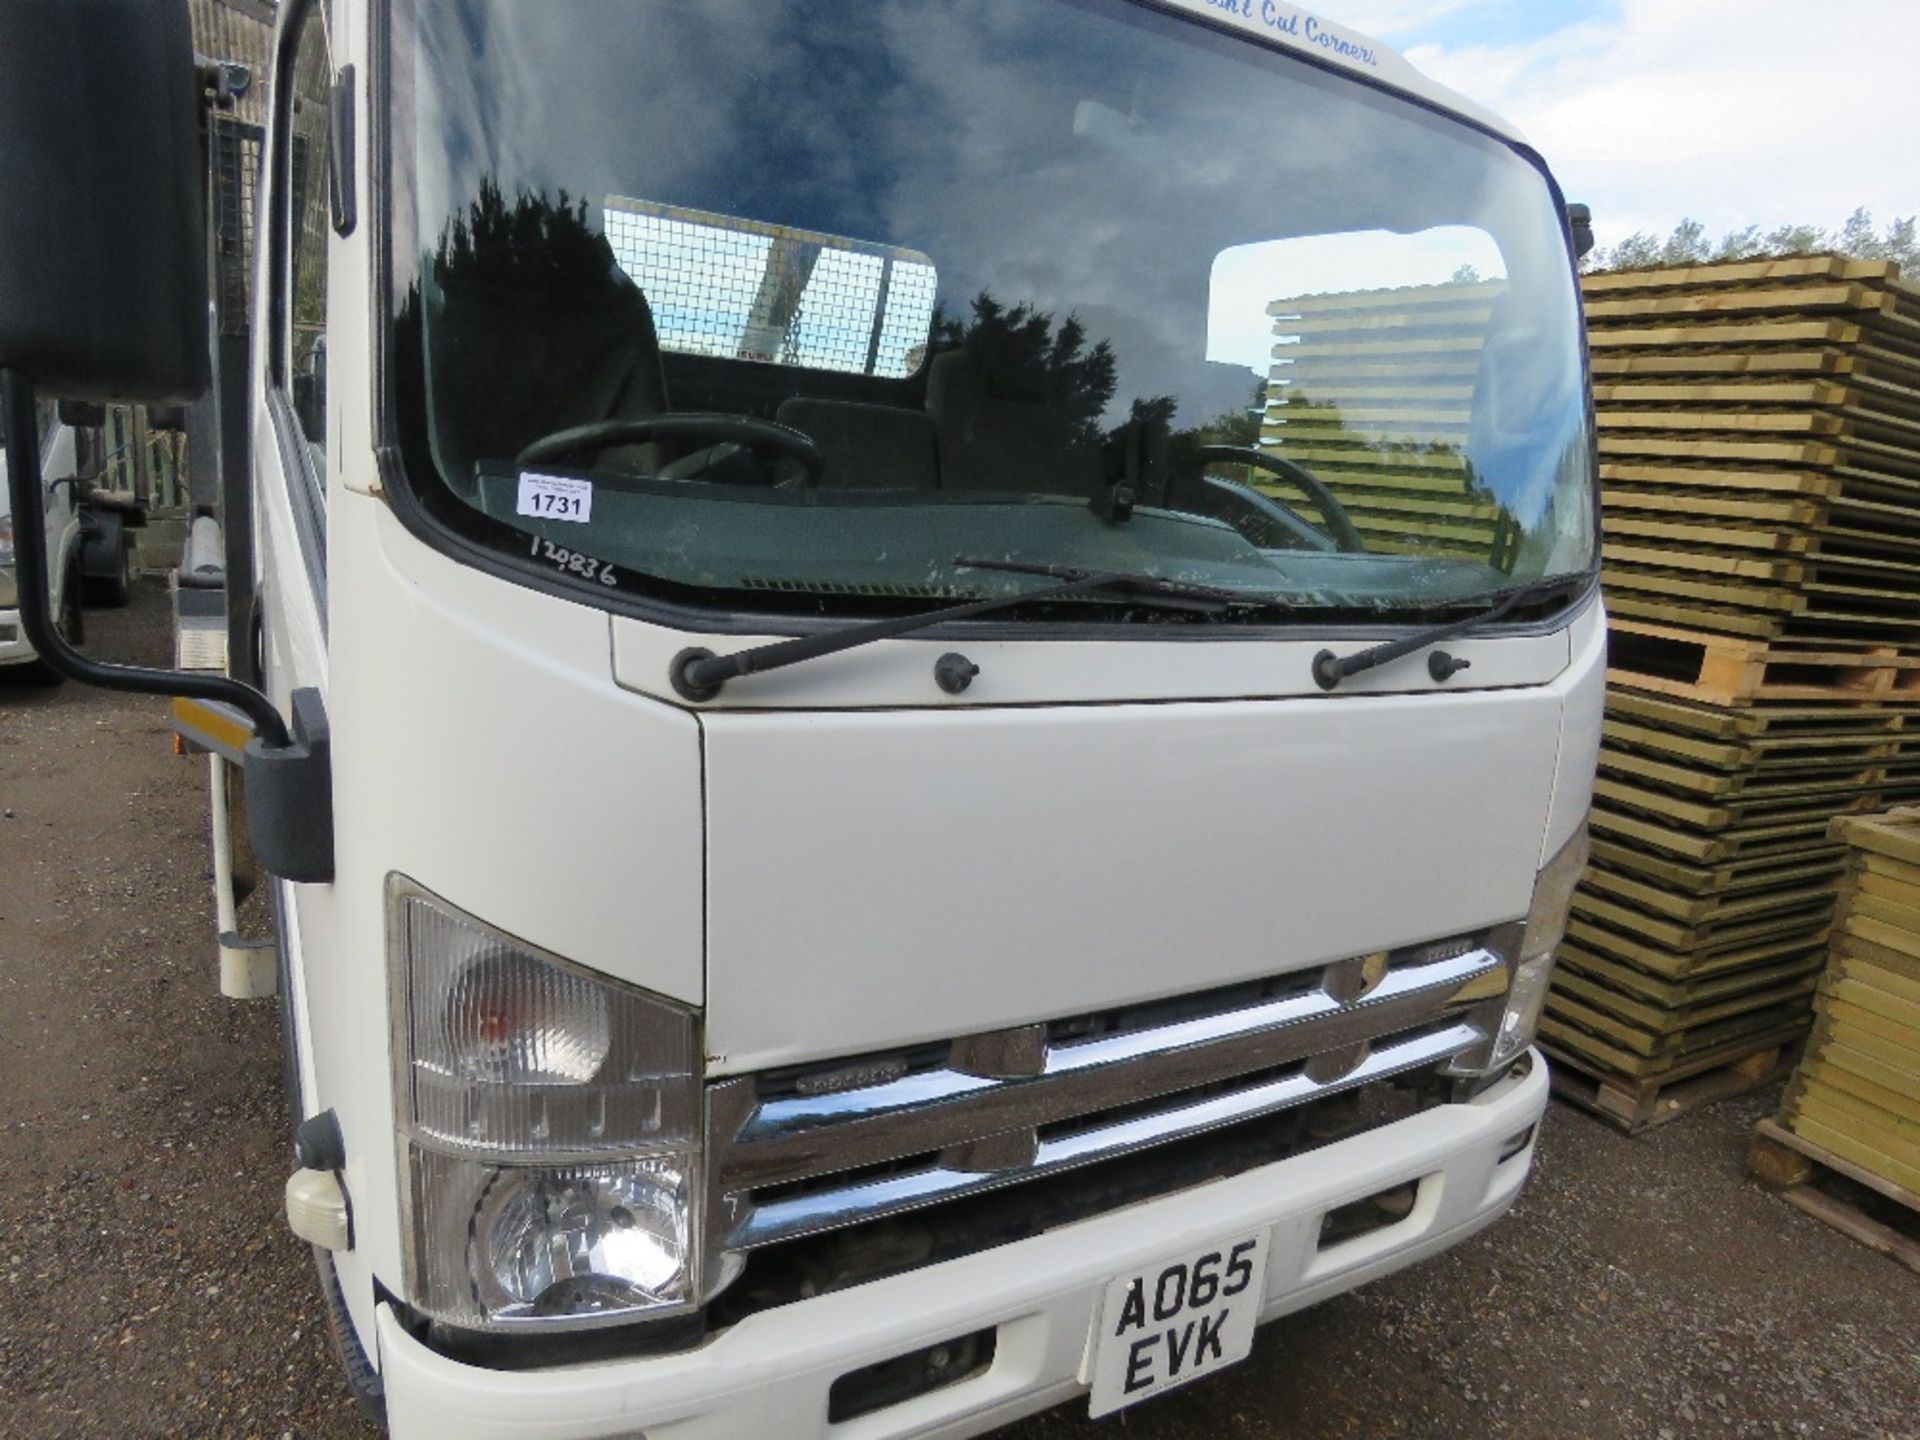 ISUZU N2R N75-150 7.5 TONNE SKIP LORRY REG: AO65 EVK. FIRST REGISTERED 12/11/2015 WITH V5. (CHECKED - Image 2 of 12